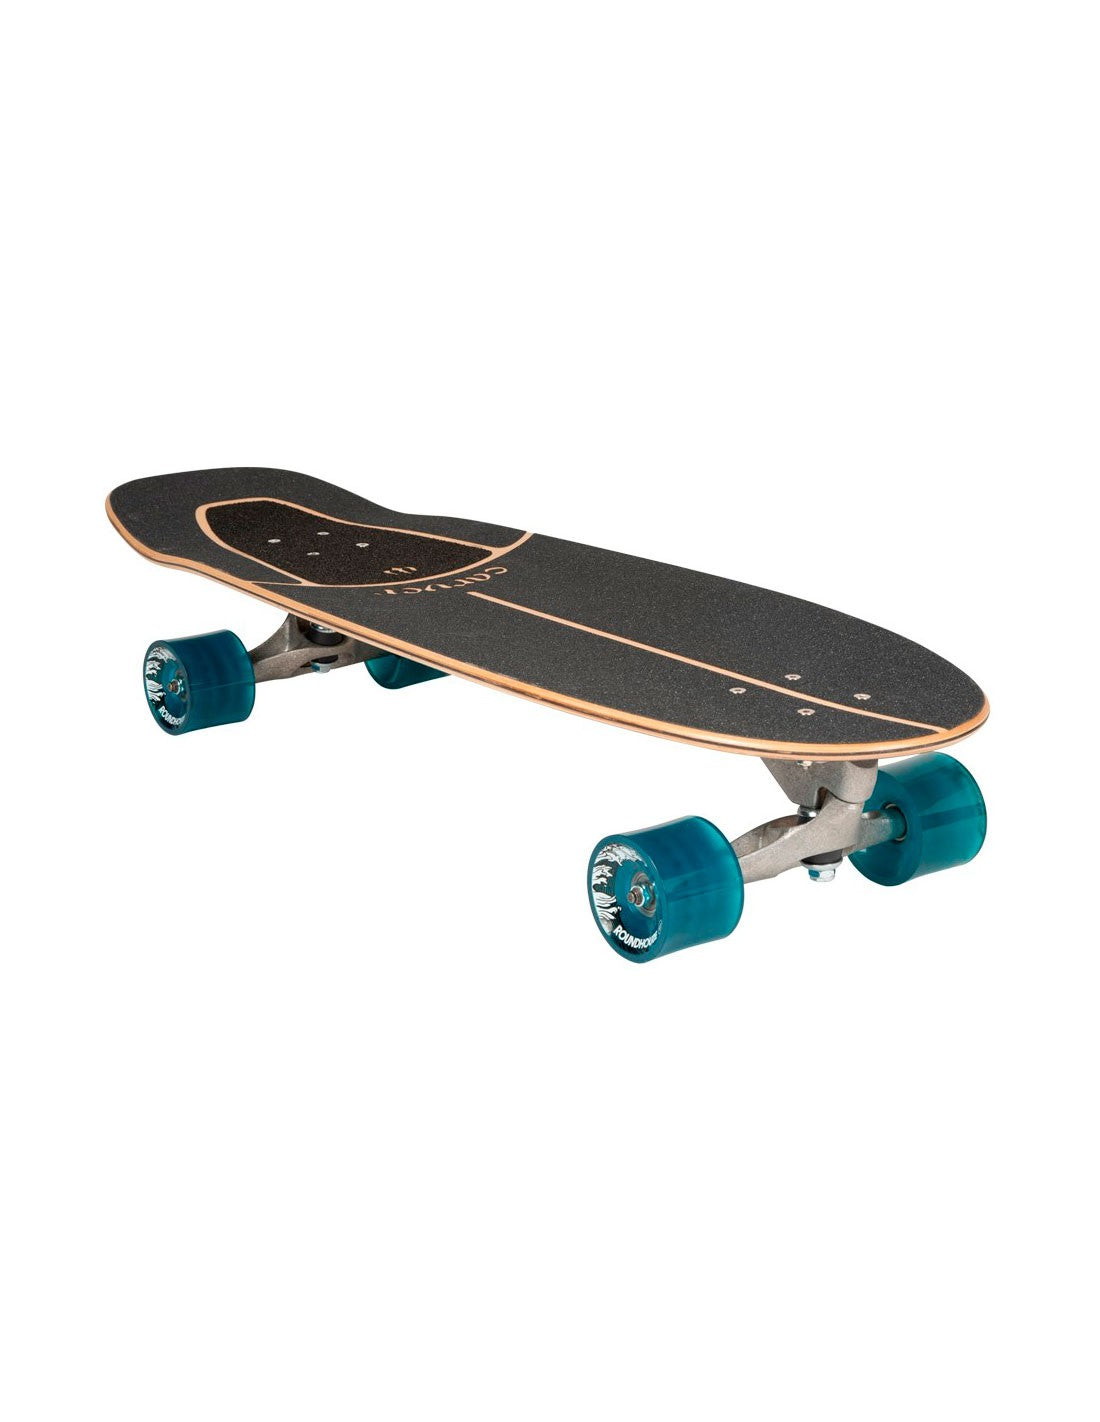 SurfSkate Carver Knox Quill CX 31.25"